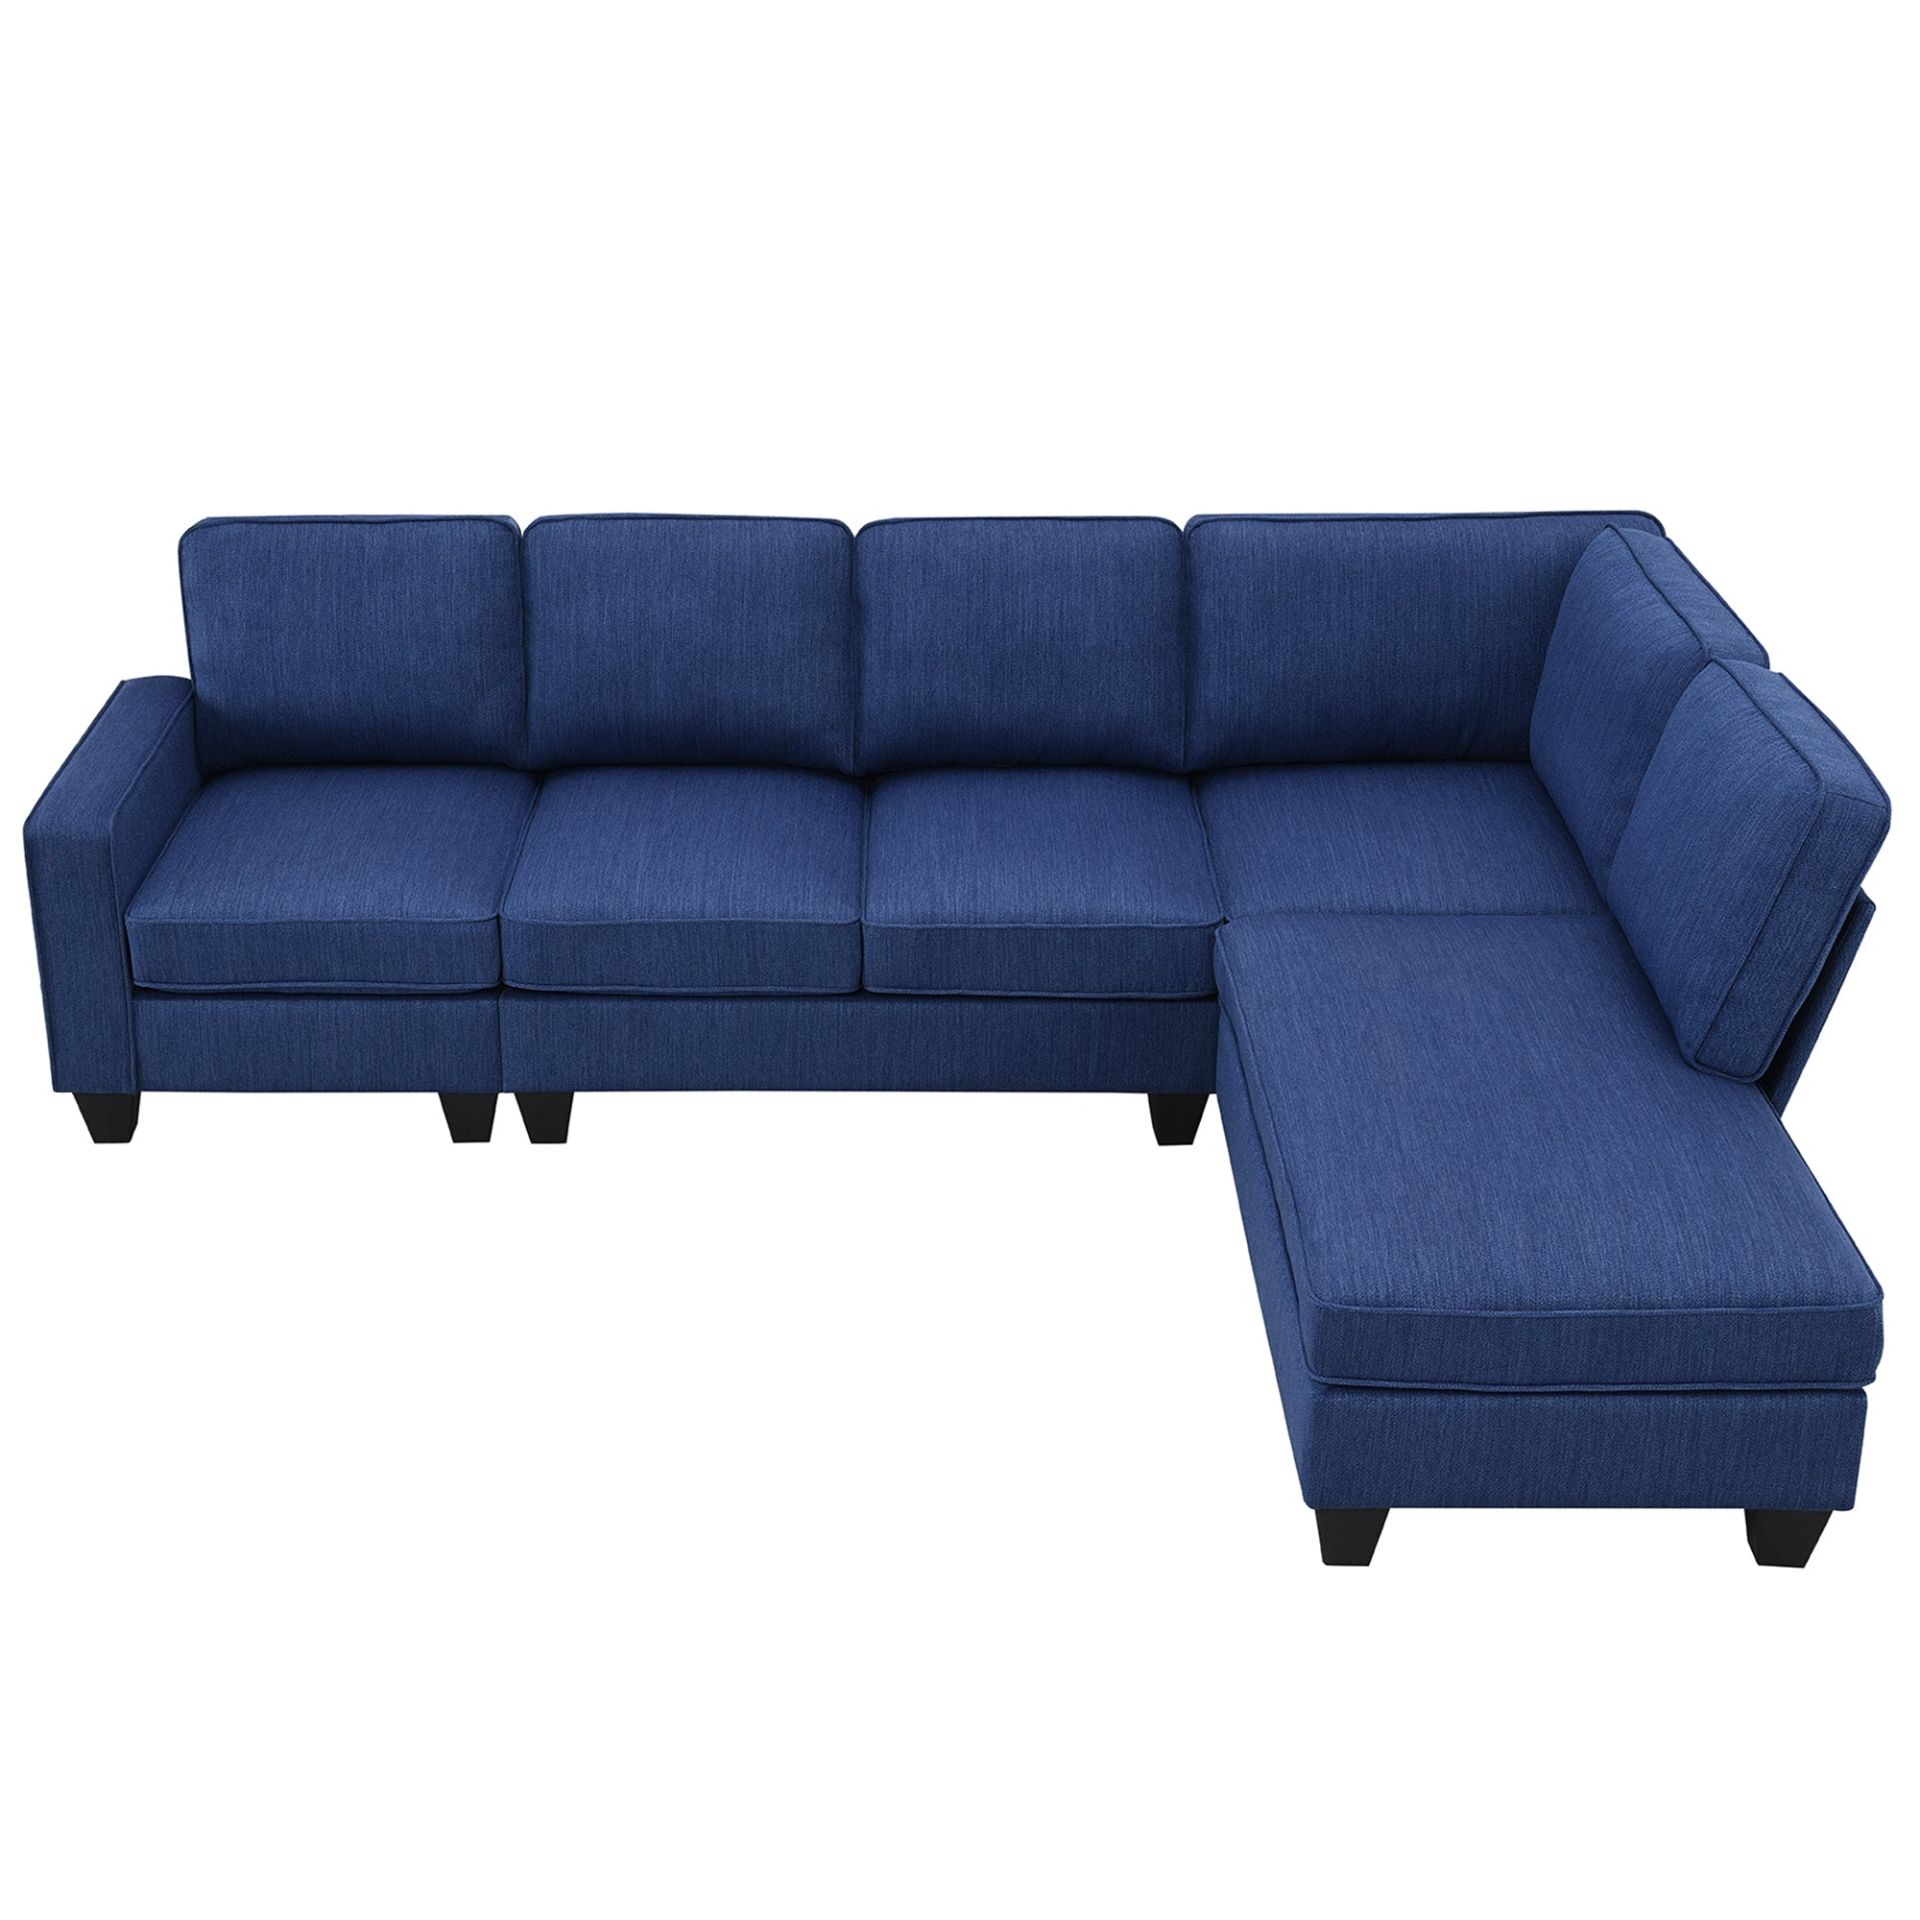 Blue - Plush L-Shape 7-Seat Sectional Sofa with Chaise Lounge and Convertible Ottoman (104"x79")